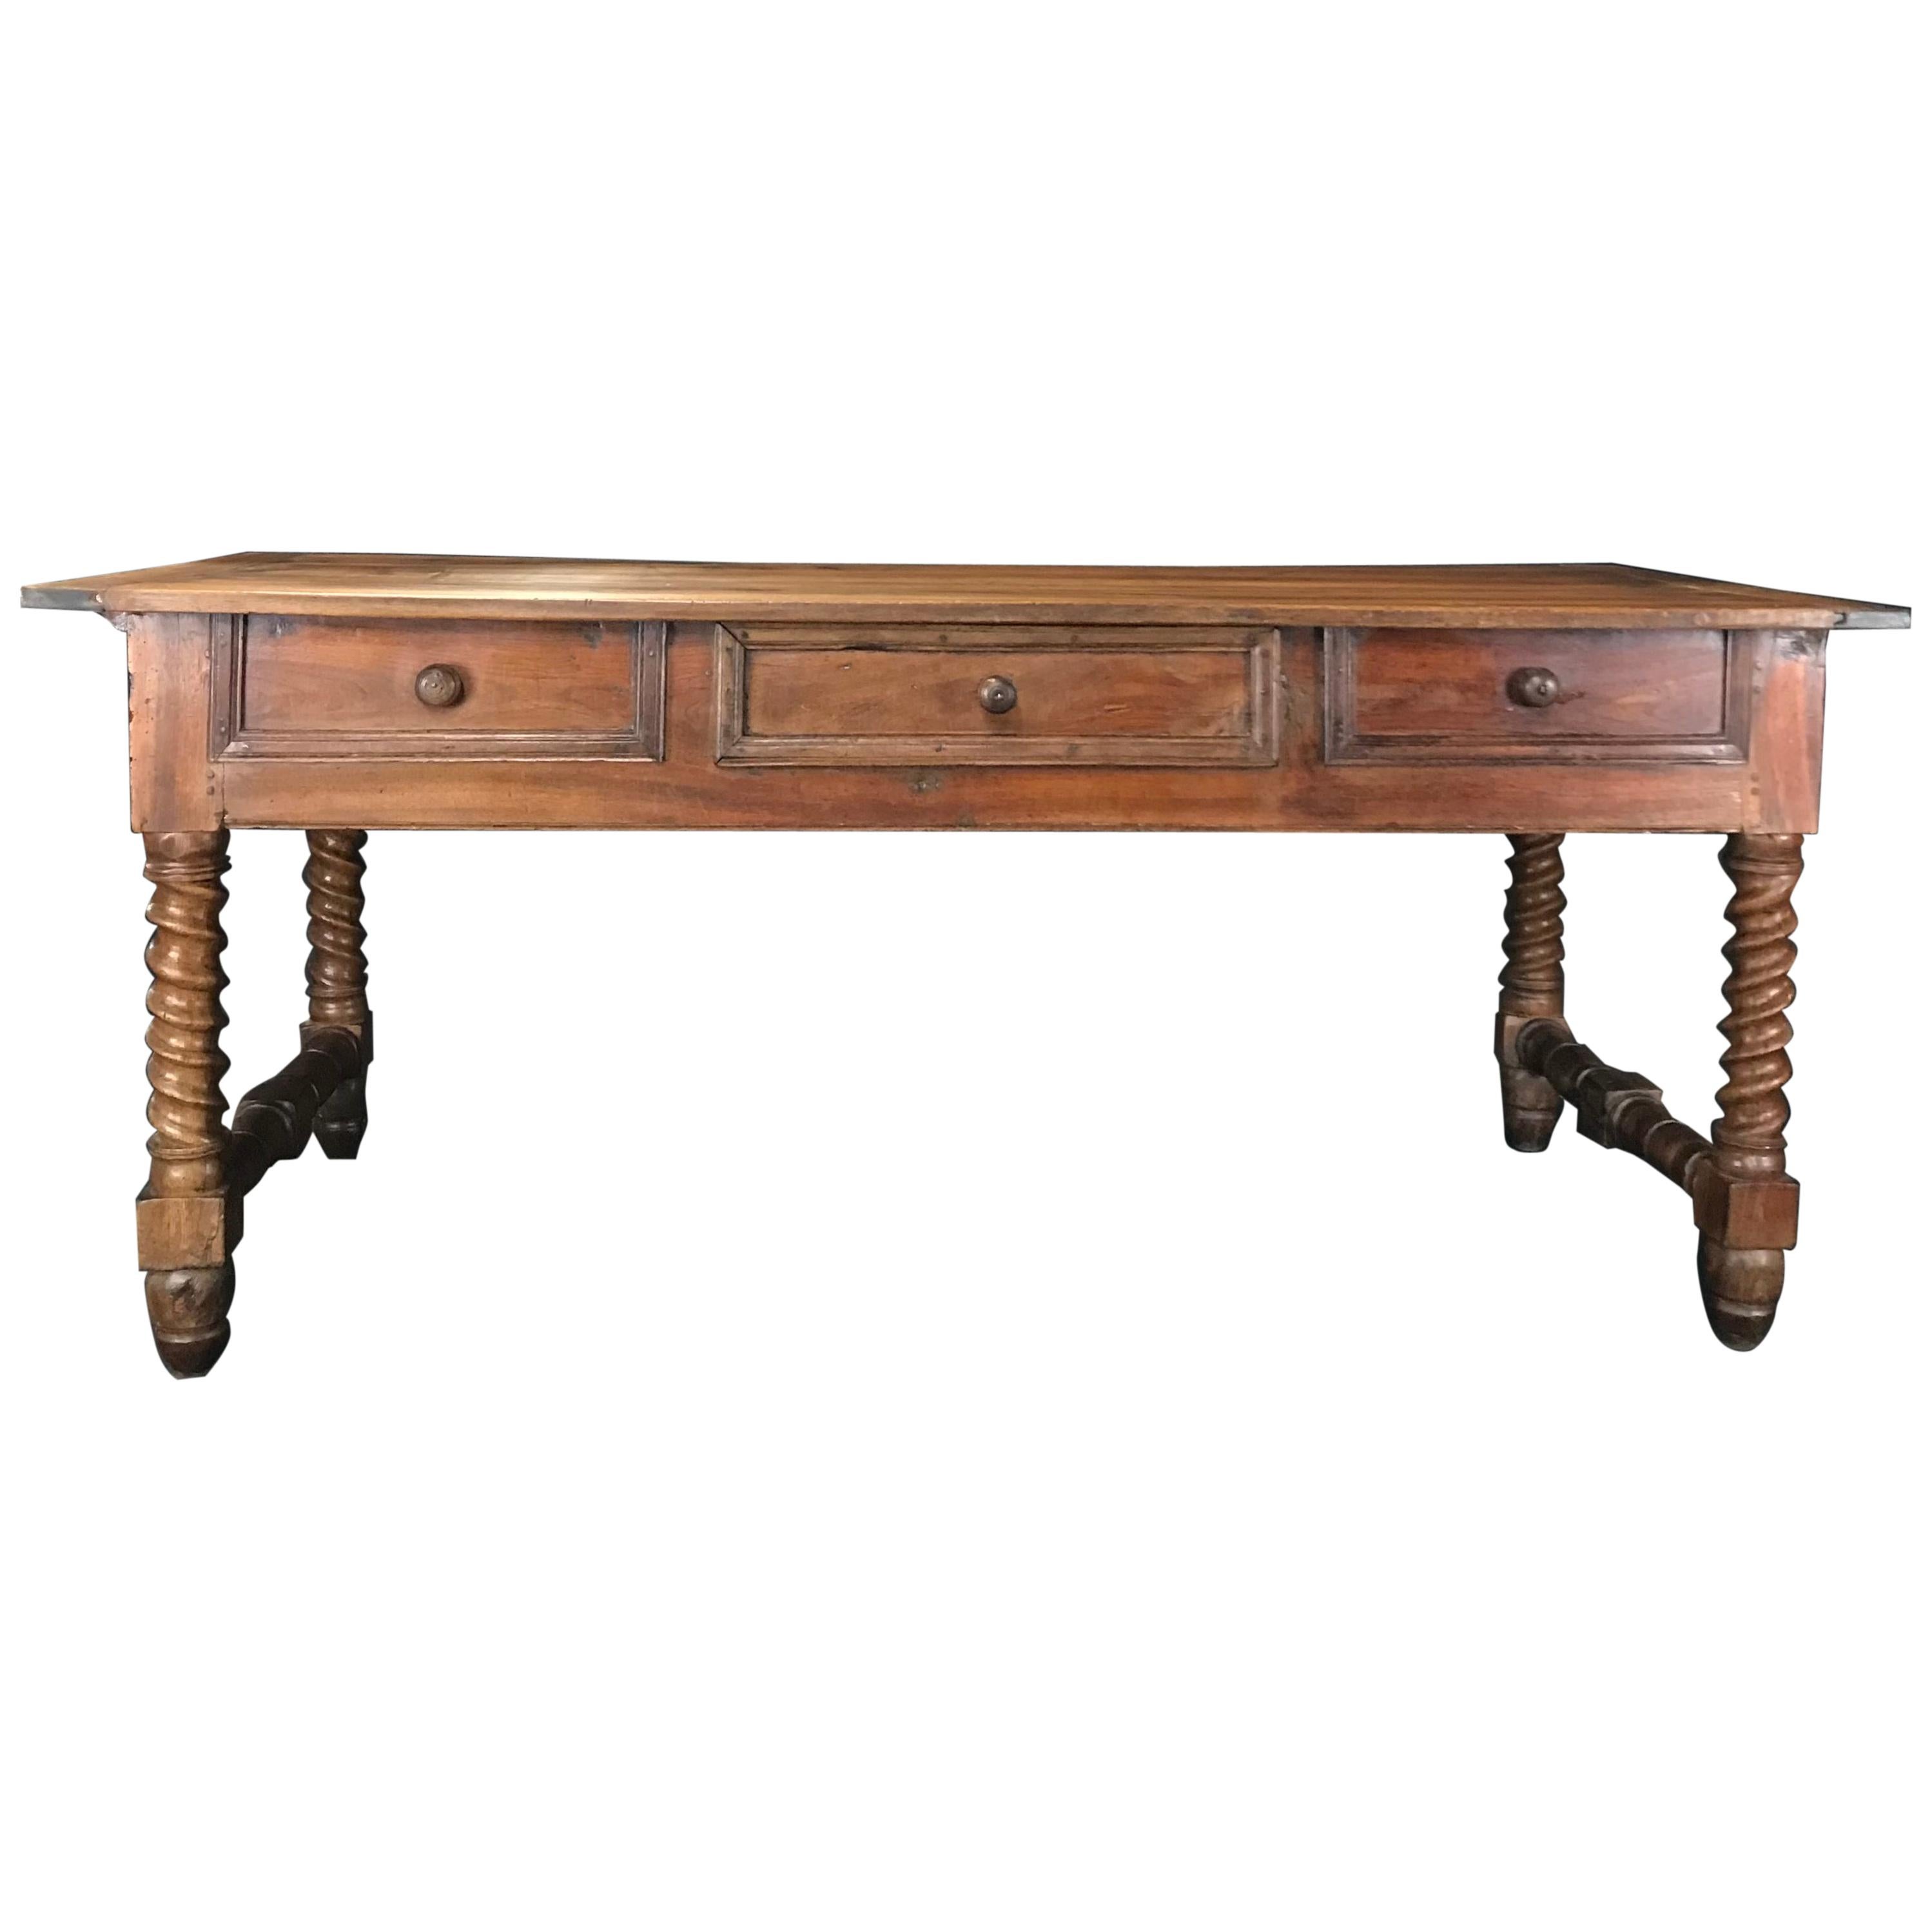 Oozing with Character Large 19th Century Walnut Farm Table or Kitchen Island